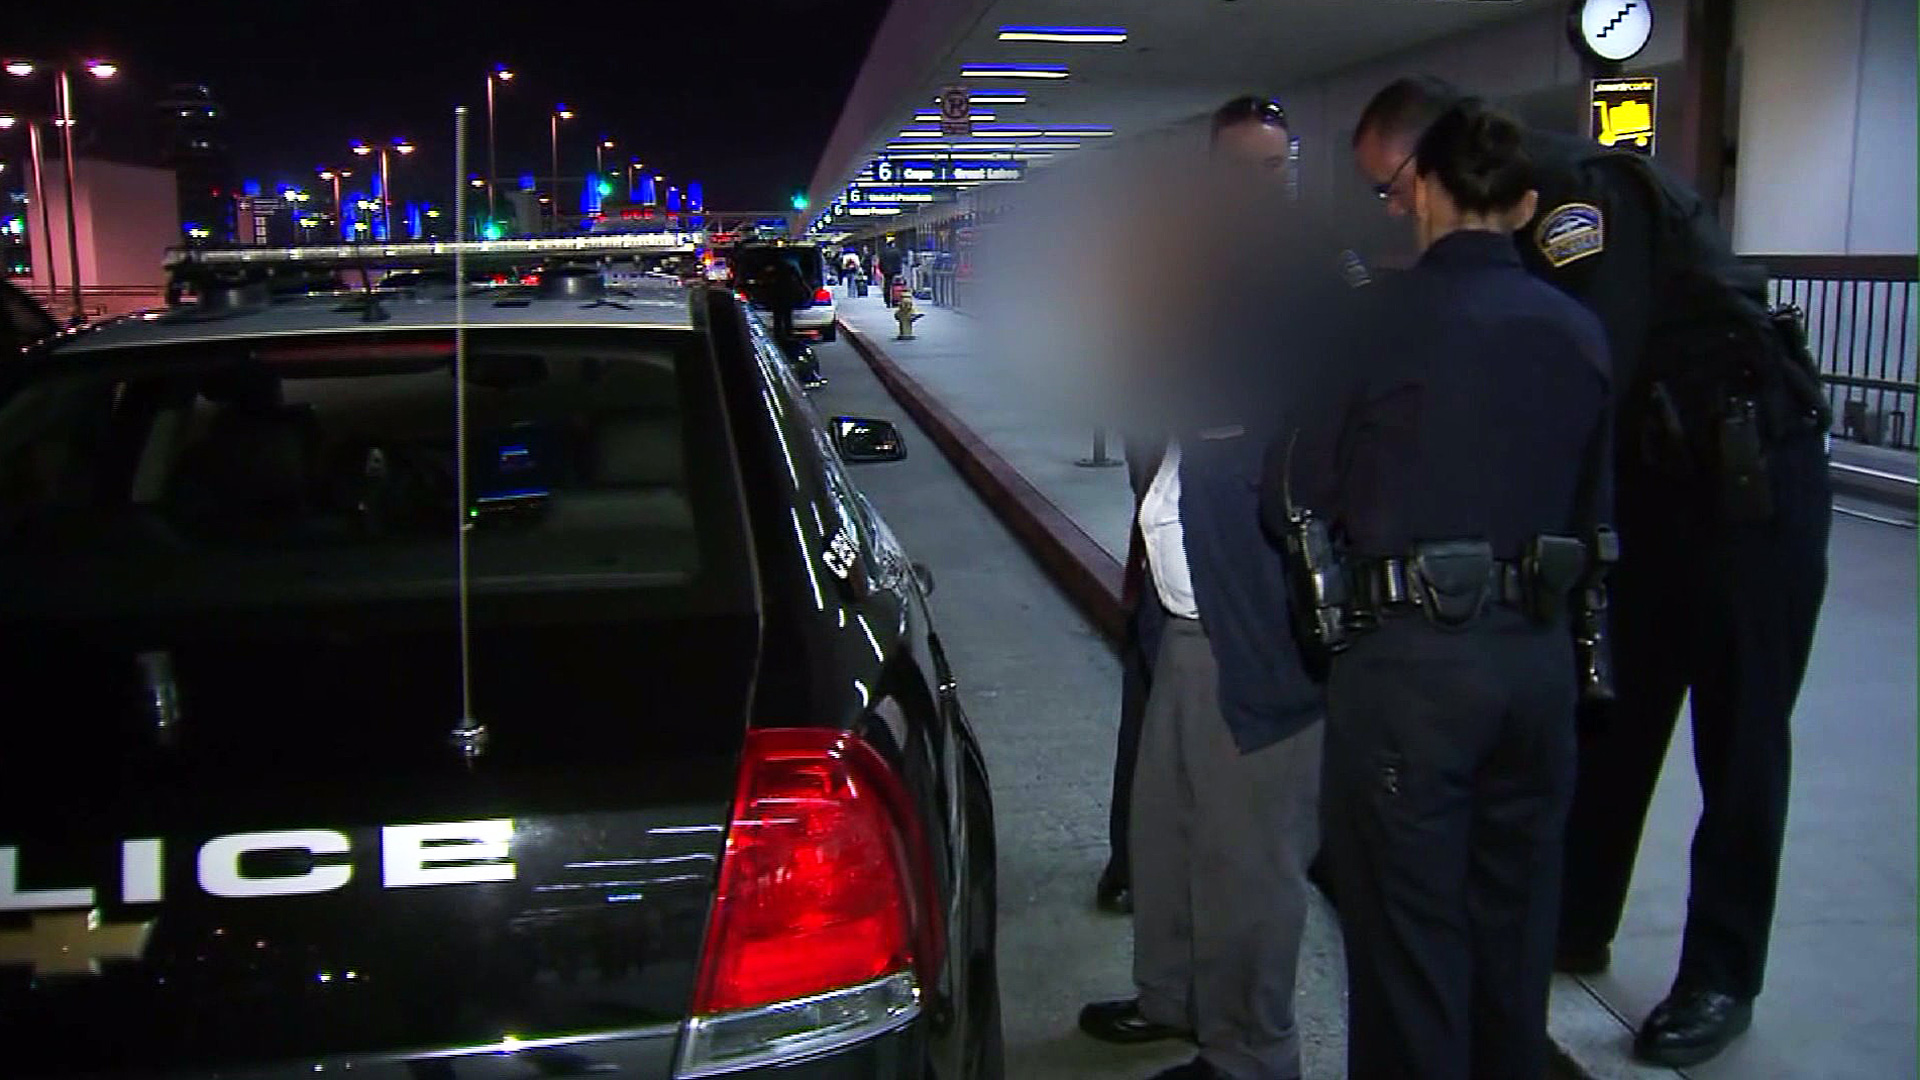 6 Arrests Made At LAX Airport – Baggage Theft Operation